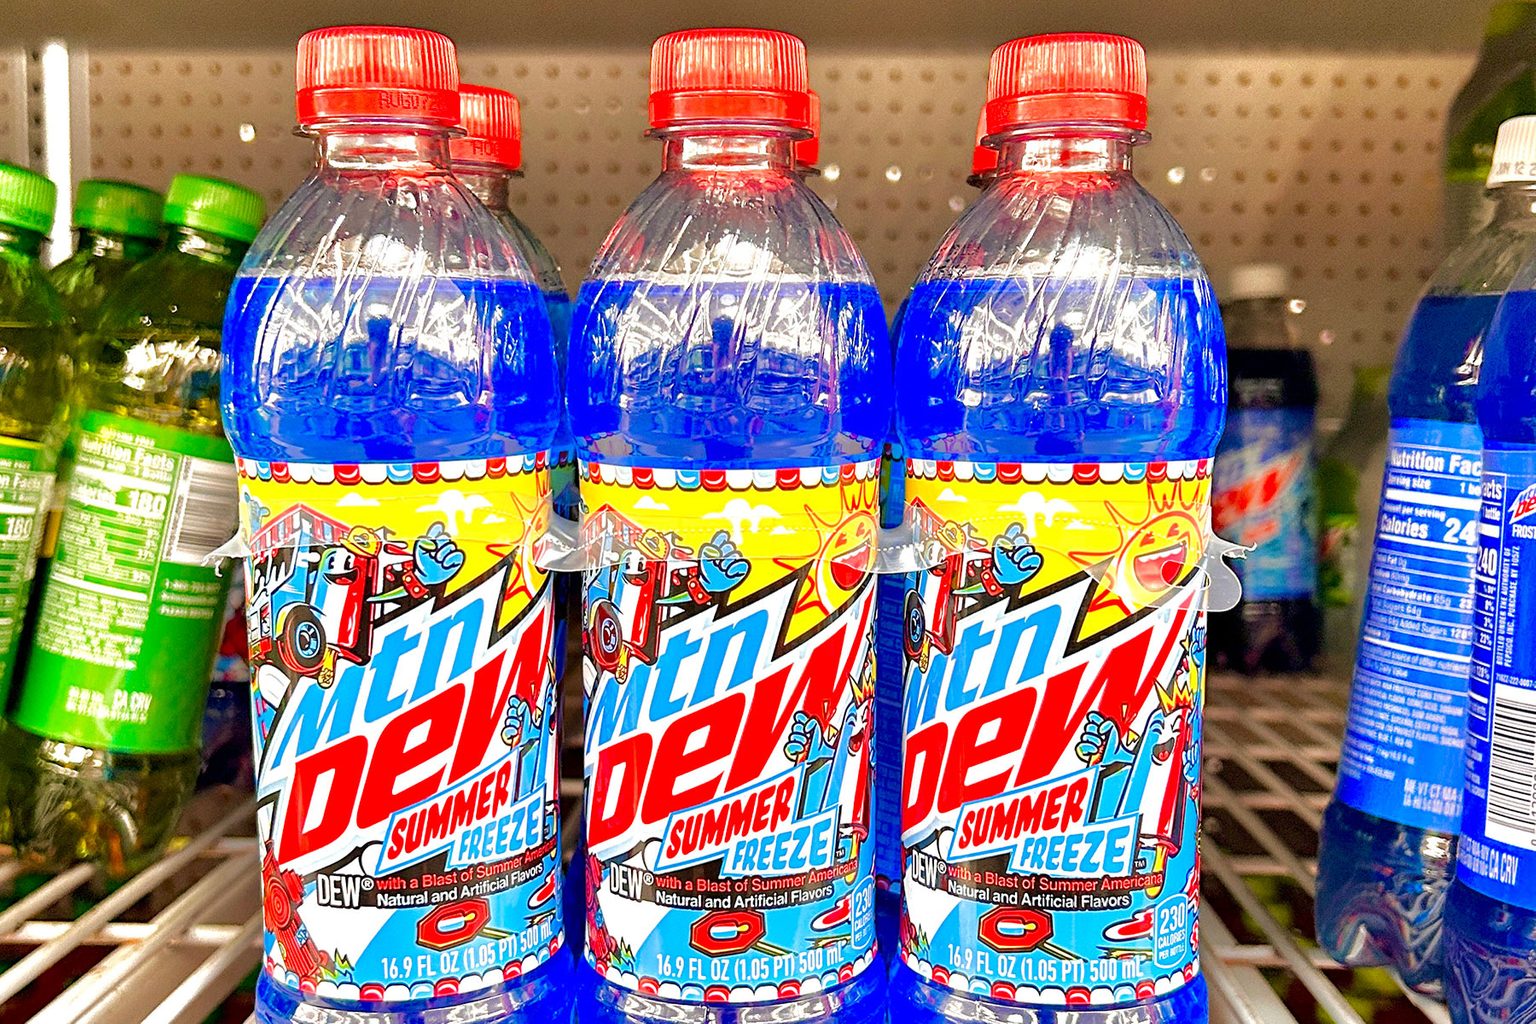 Get Ready to Chill Out With Mountain Dew Summer Freeze